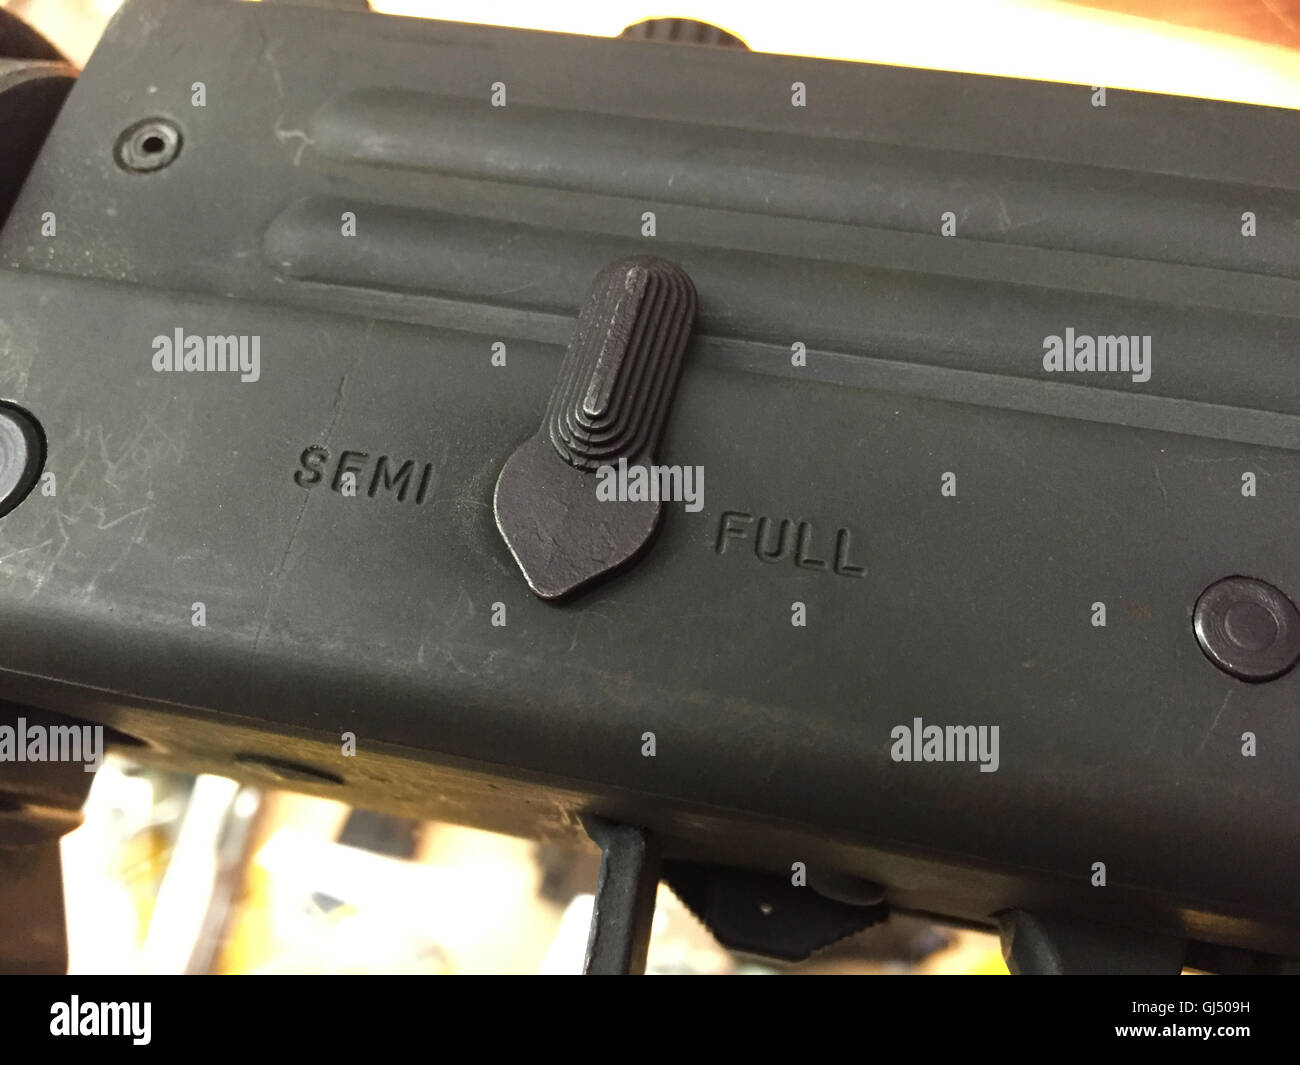 Selector Switch on a Mac-10 firearm to turn it from Fully Automatic to Semi-Automatic Stock Photo